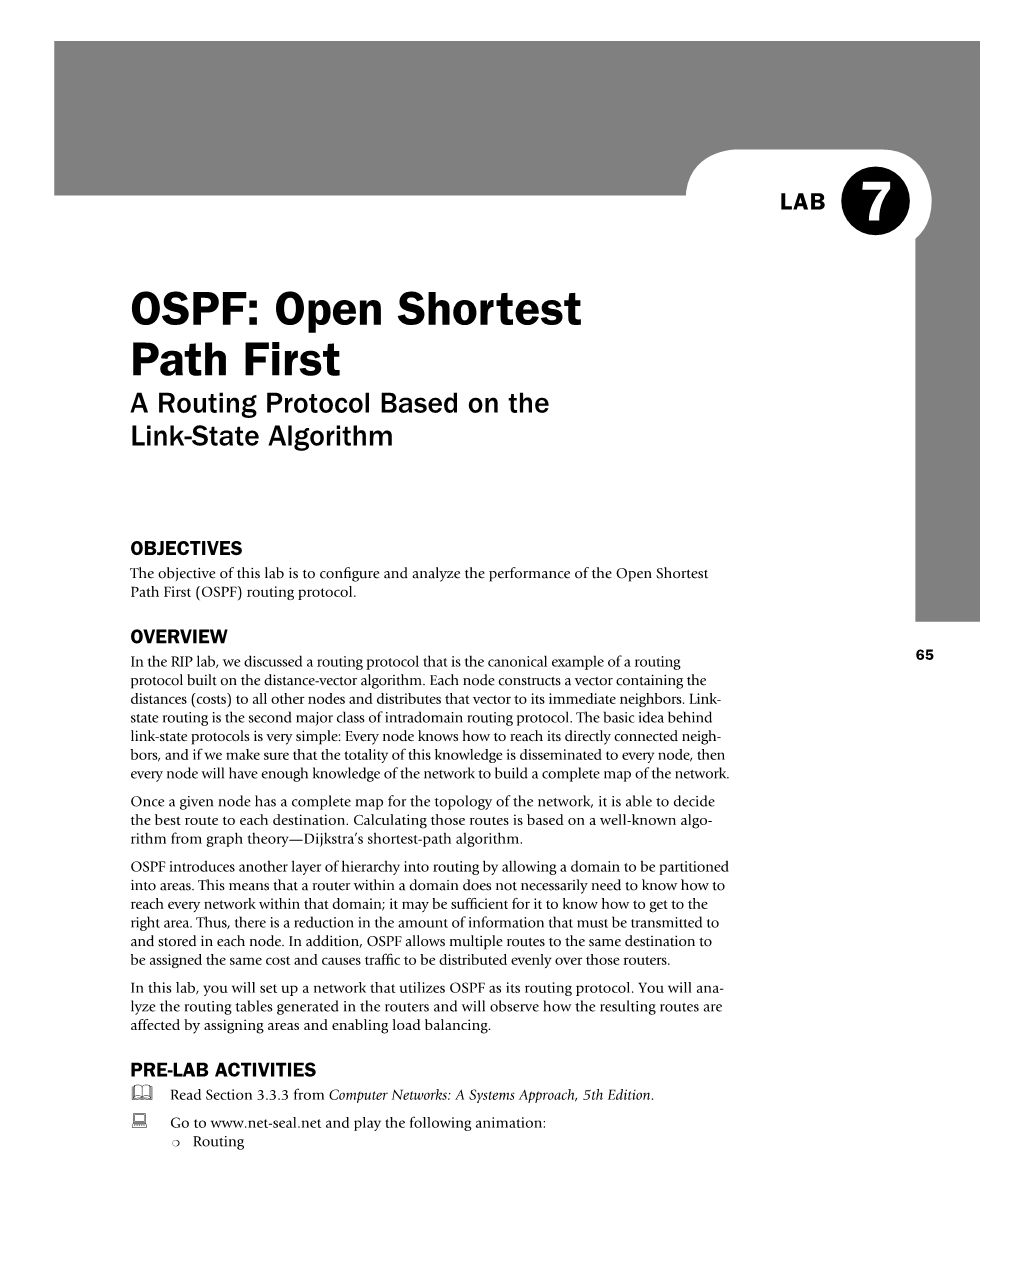 OSPF: Open Shortest Path First a Routing Protocol Based on the Link-State Algorithm